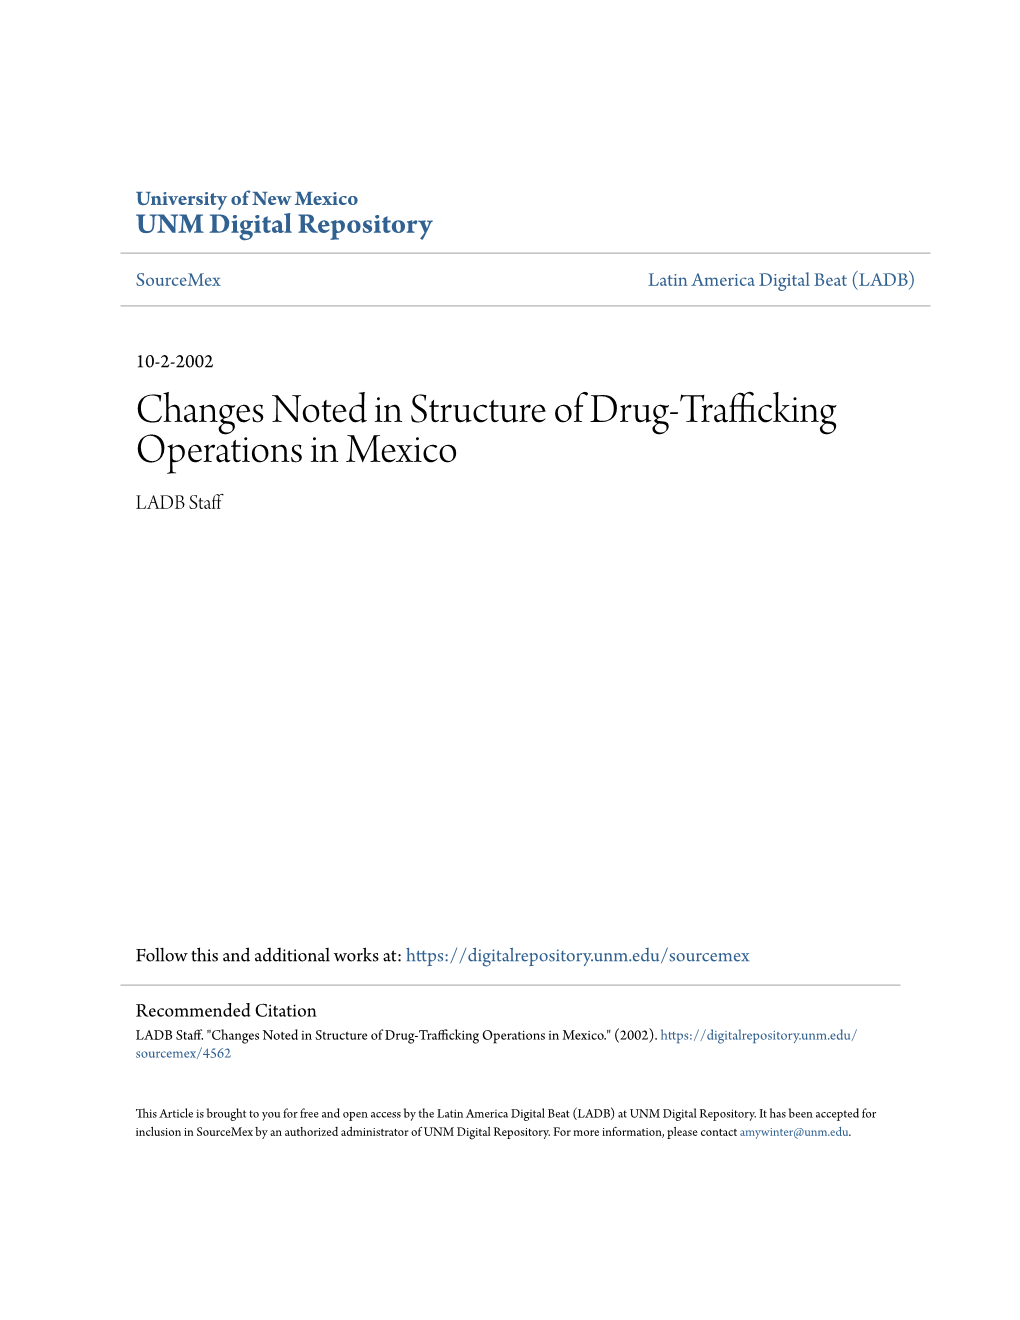 Changes Noted in Structure of Drug-Trafficking Operations in Mexico LADB Staff